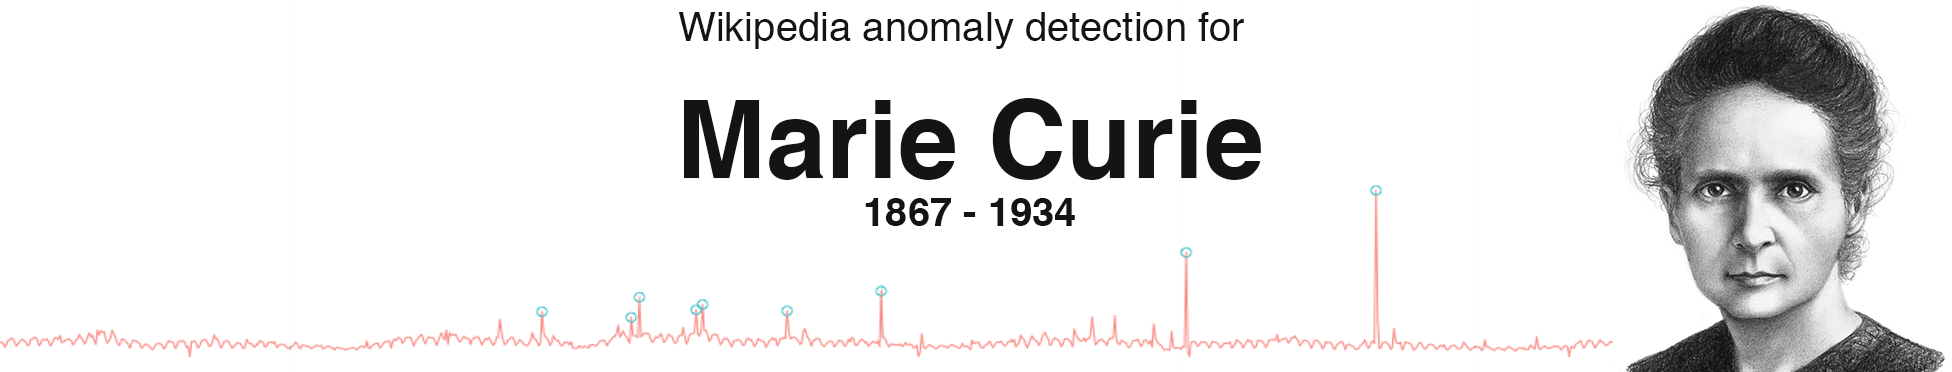 Marie Curie wikipedia anomaly detection